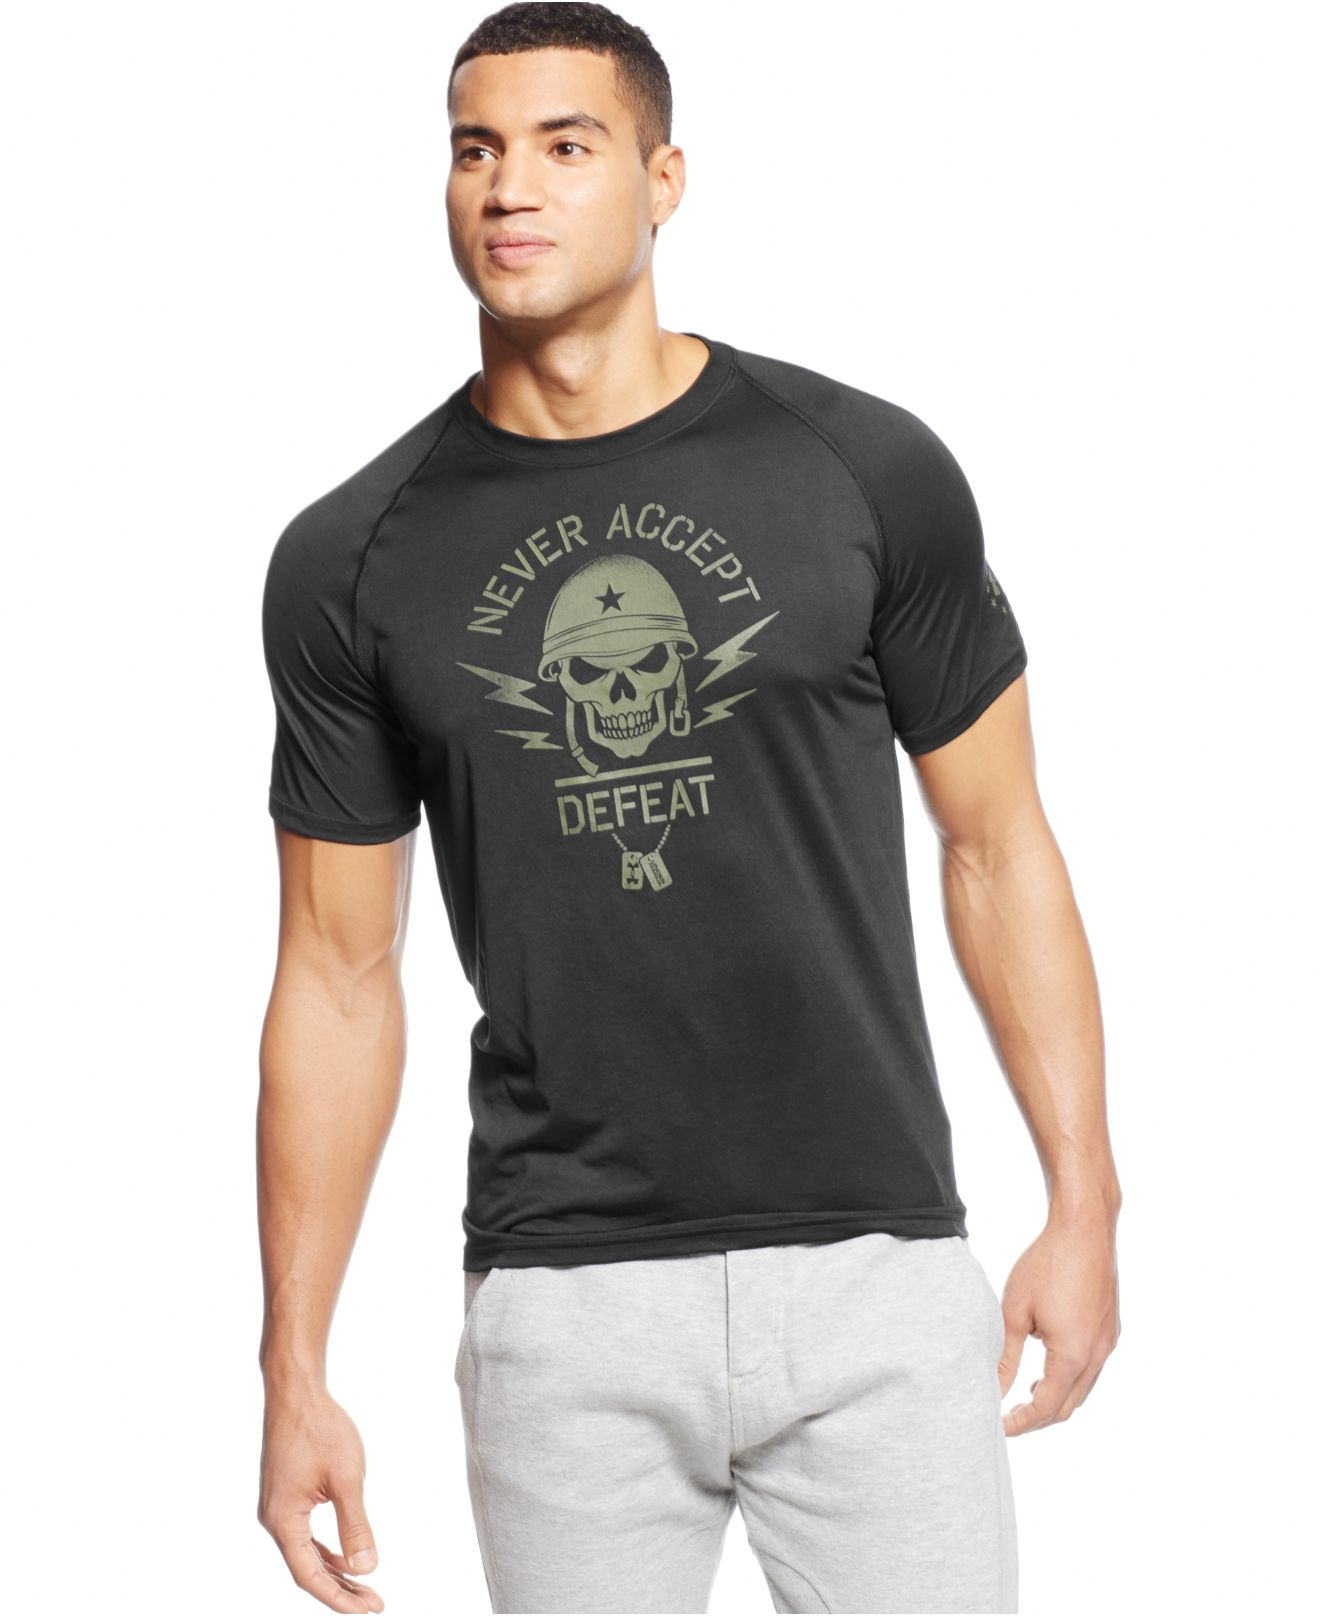 Lyst - Under Armour Never Accept Defeat T-shirt in Black for Men